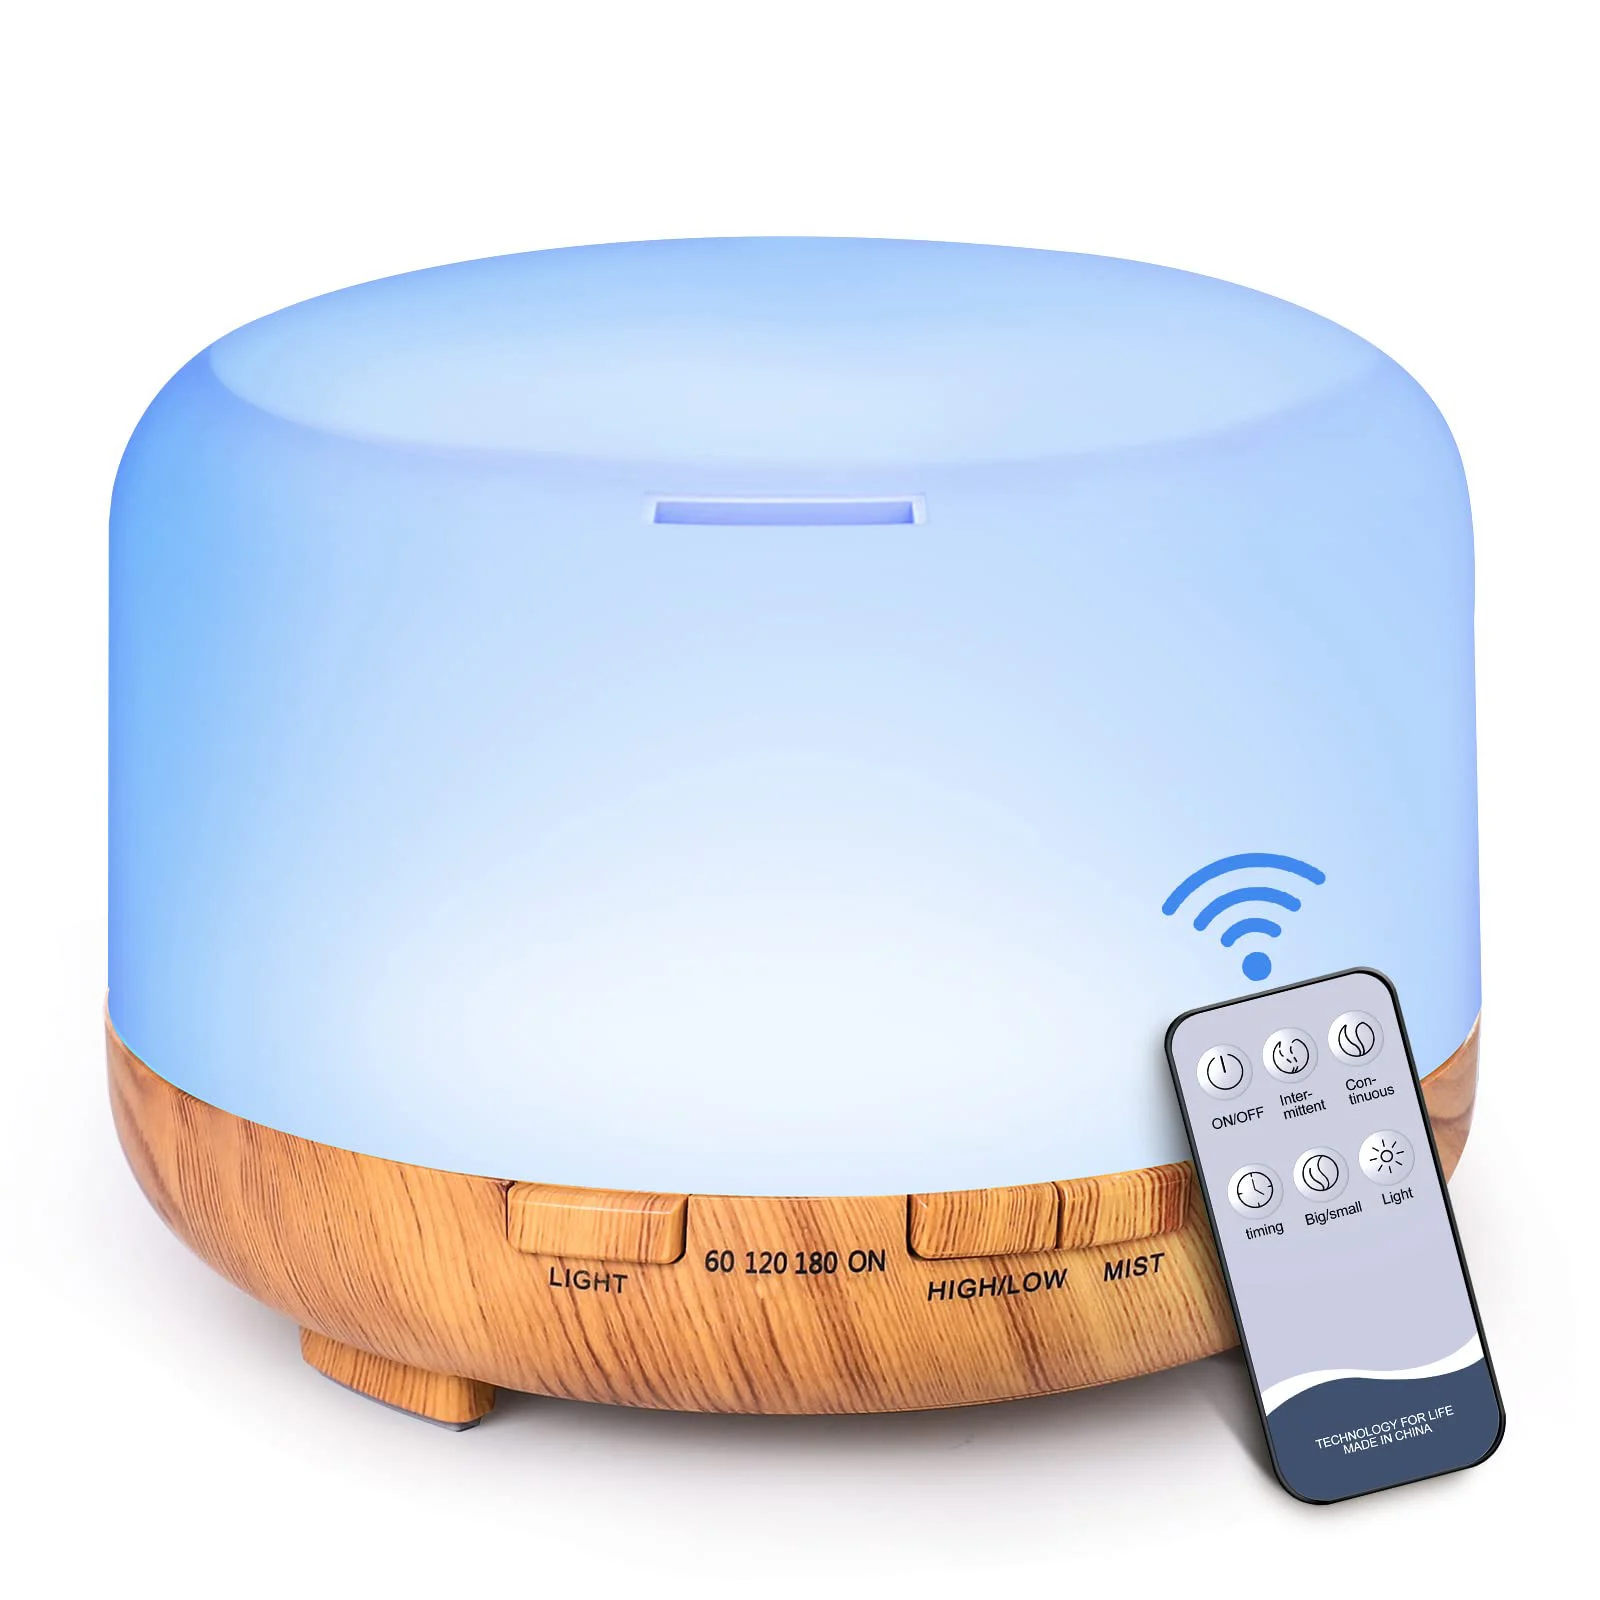 

500ML Aroma Diffuser Wood Grain Air Humidifier Essential Oil Aromatherapy With Remote Control 7 Color Lights for Home Bedroom